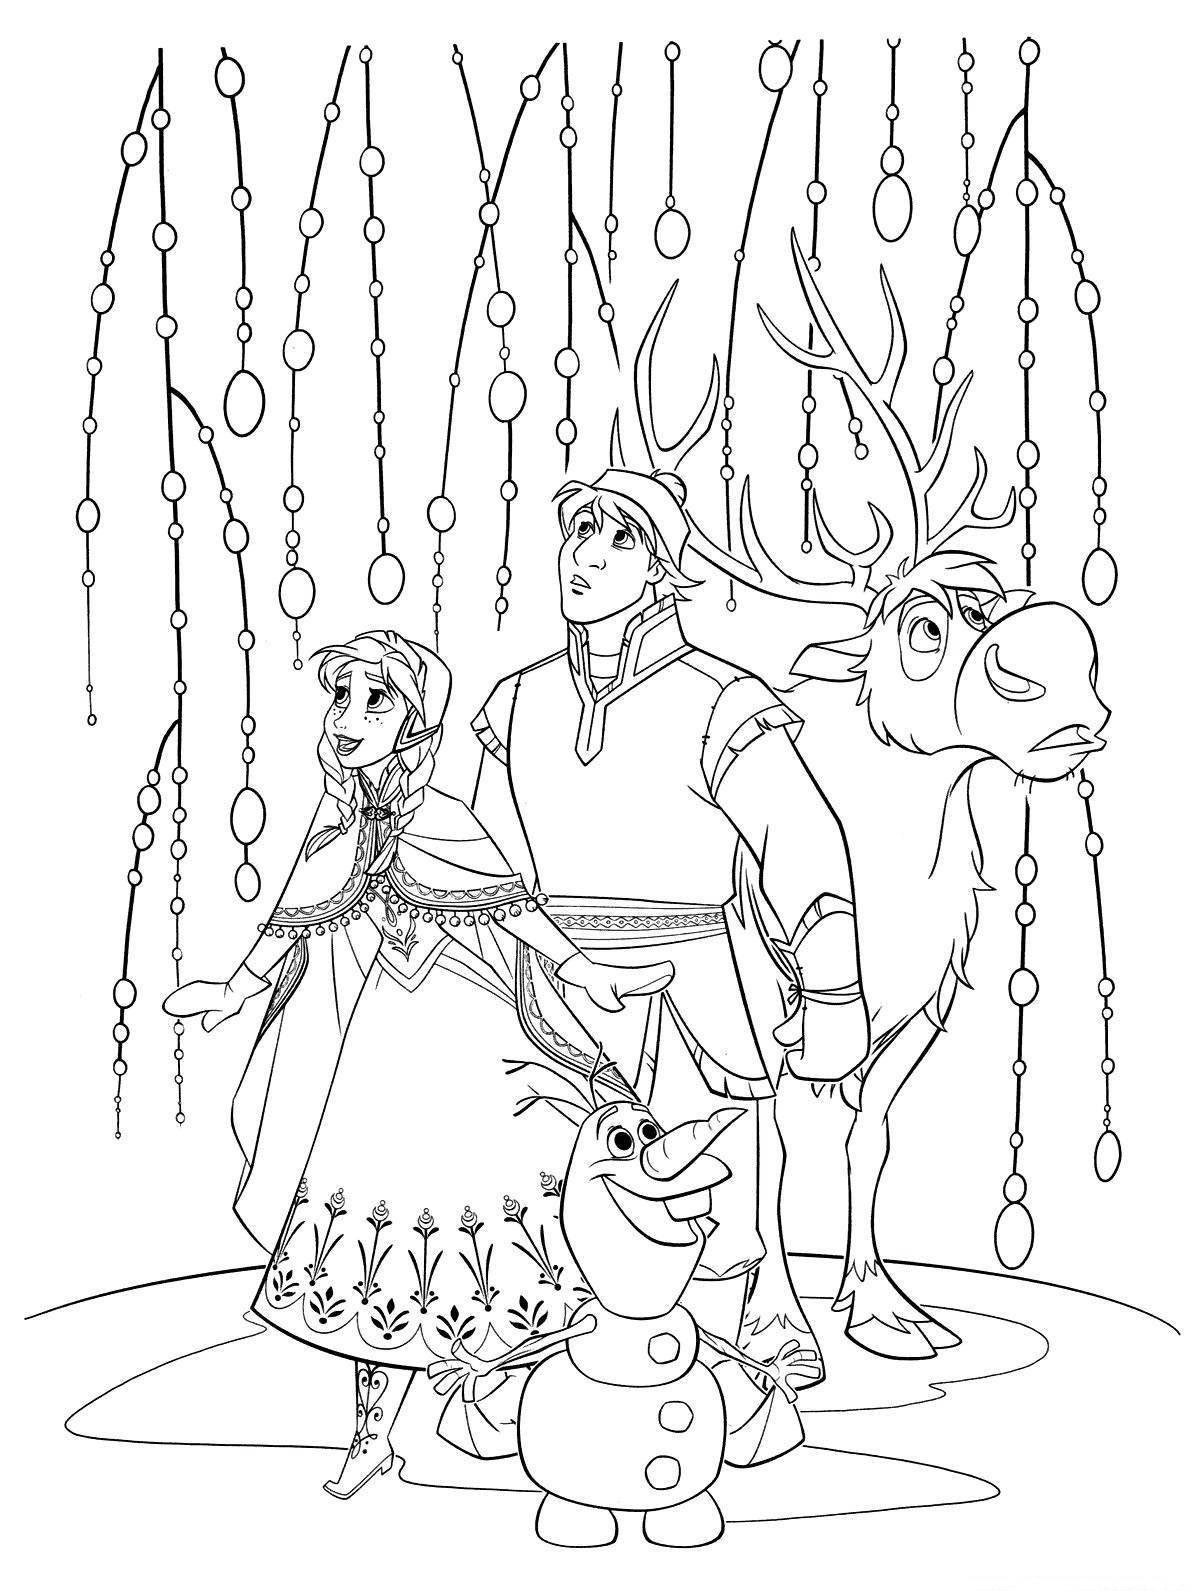 Wonderful snow queen coloring book